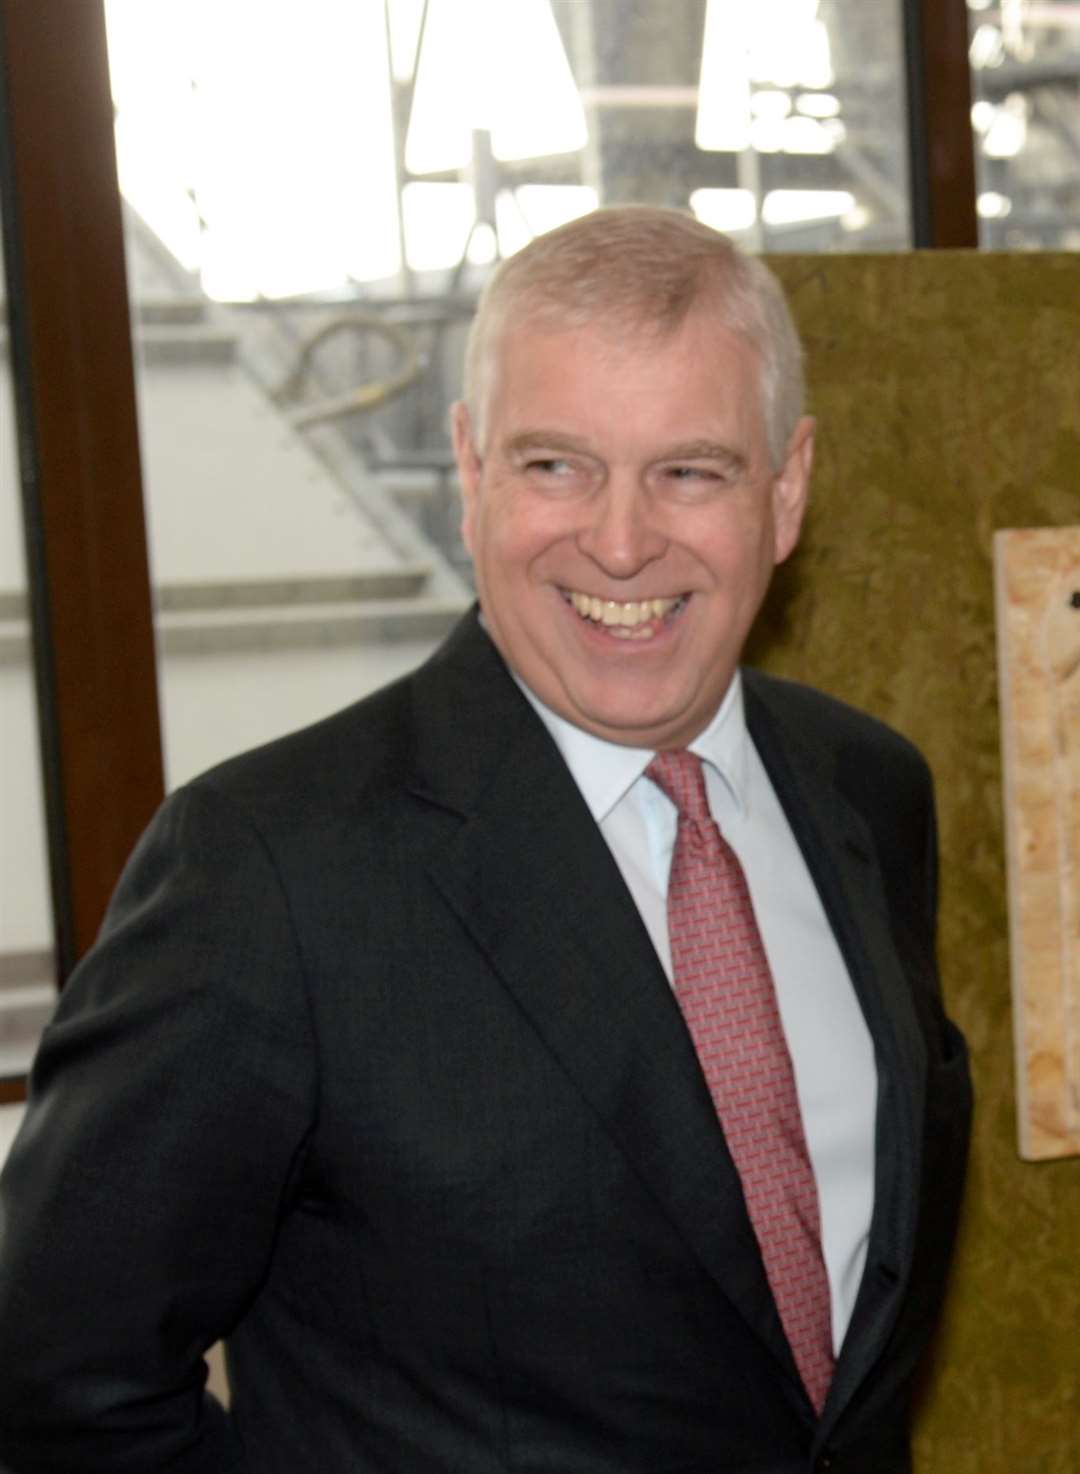 Prince Andrew is also Earl of Inverness.